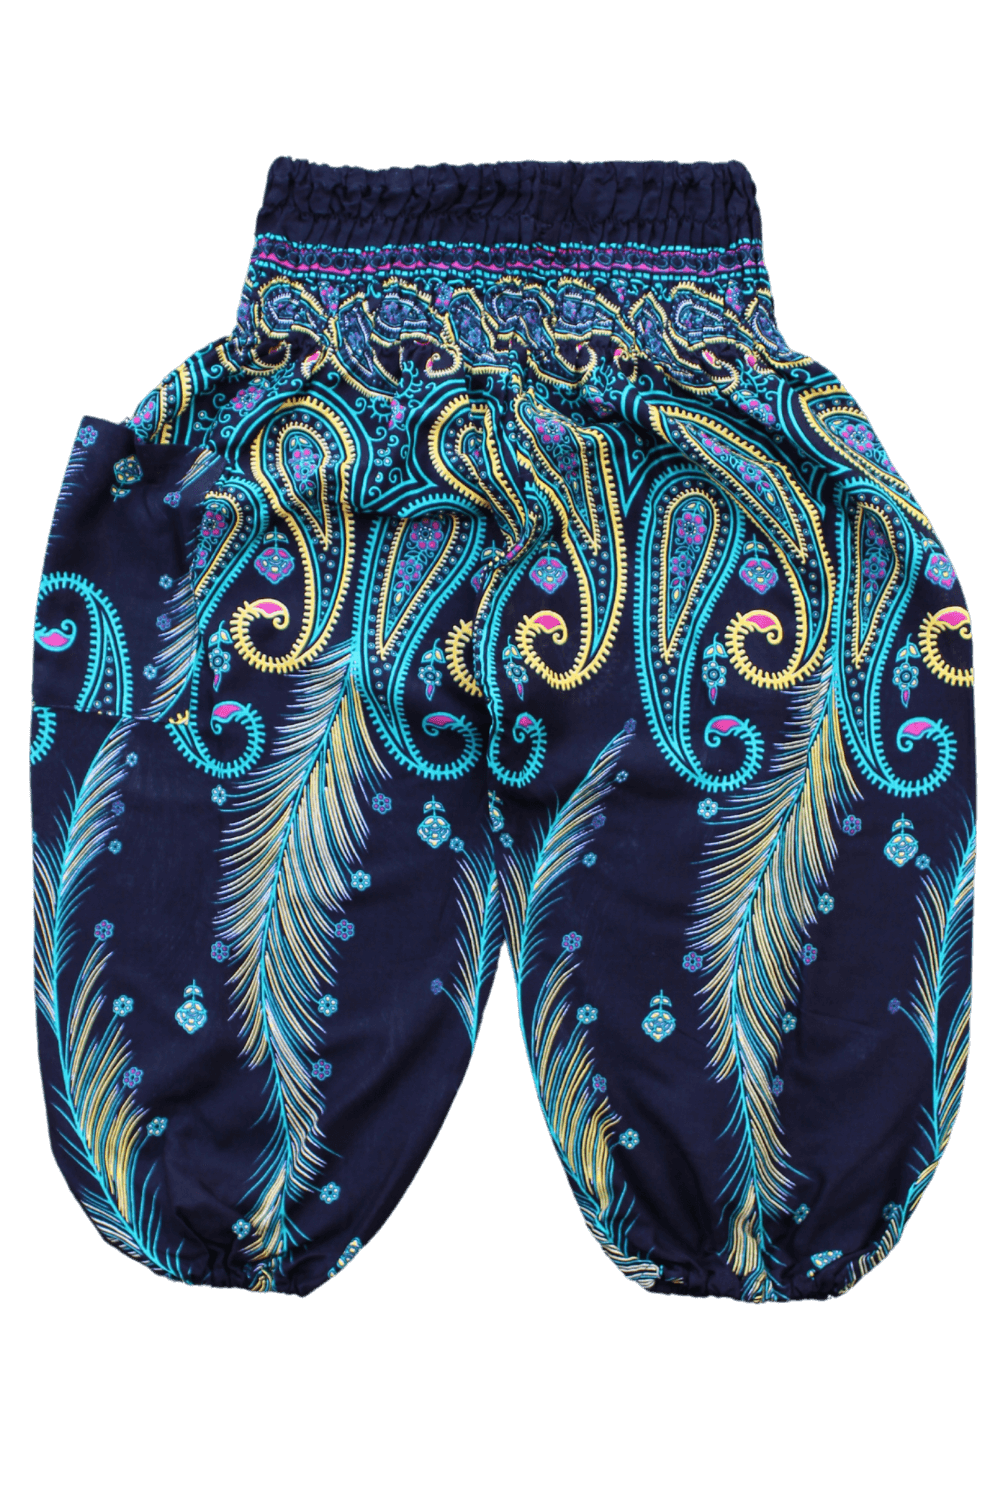 Teal Feather Kids Harem Pants, Bohemian pants for children from Bohemian Island